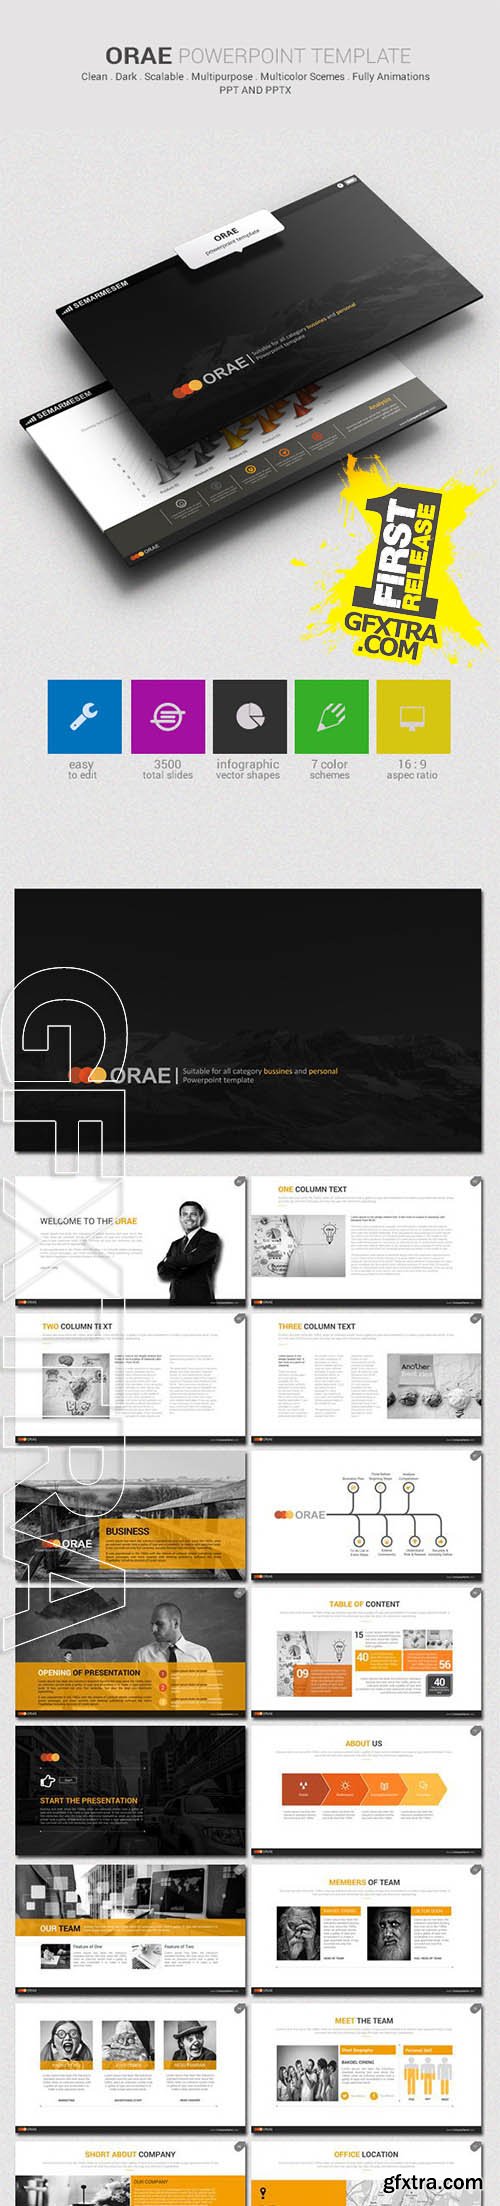 Orae Powerpoint Template - Graphicriver 9654689